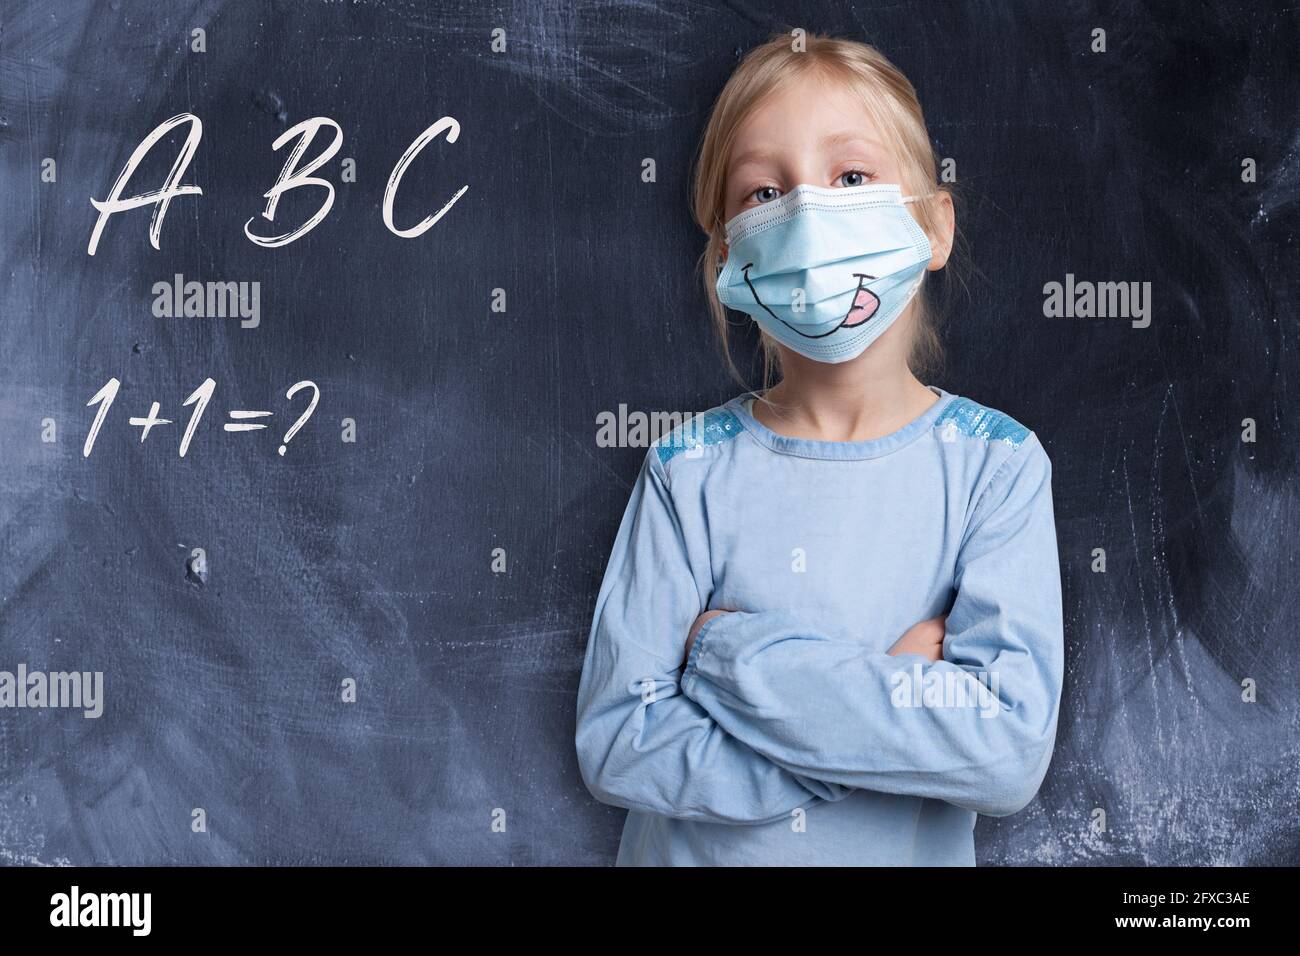 Girl with arms crossed wearing face mask by black background with alphabets and maths problem Stock Photo